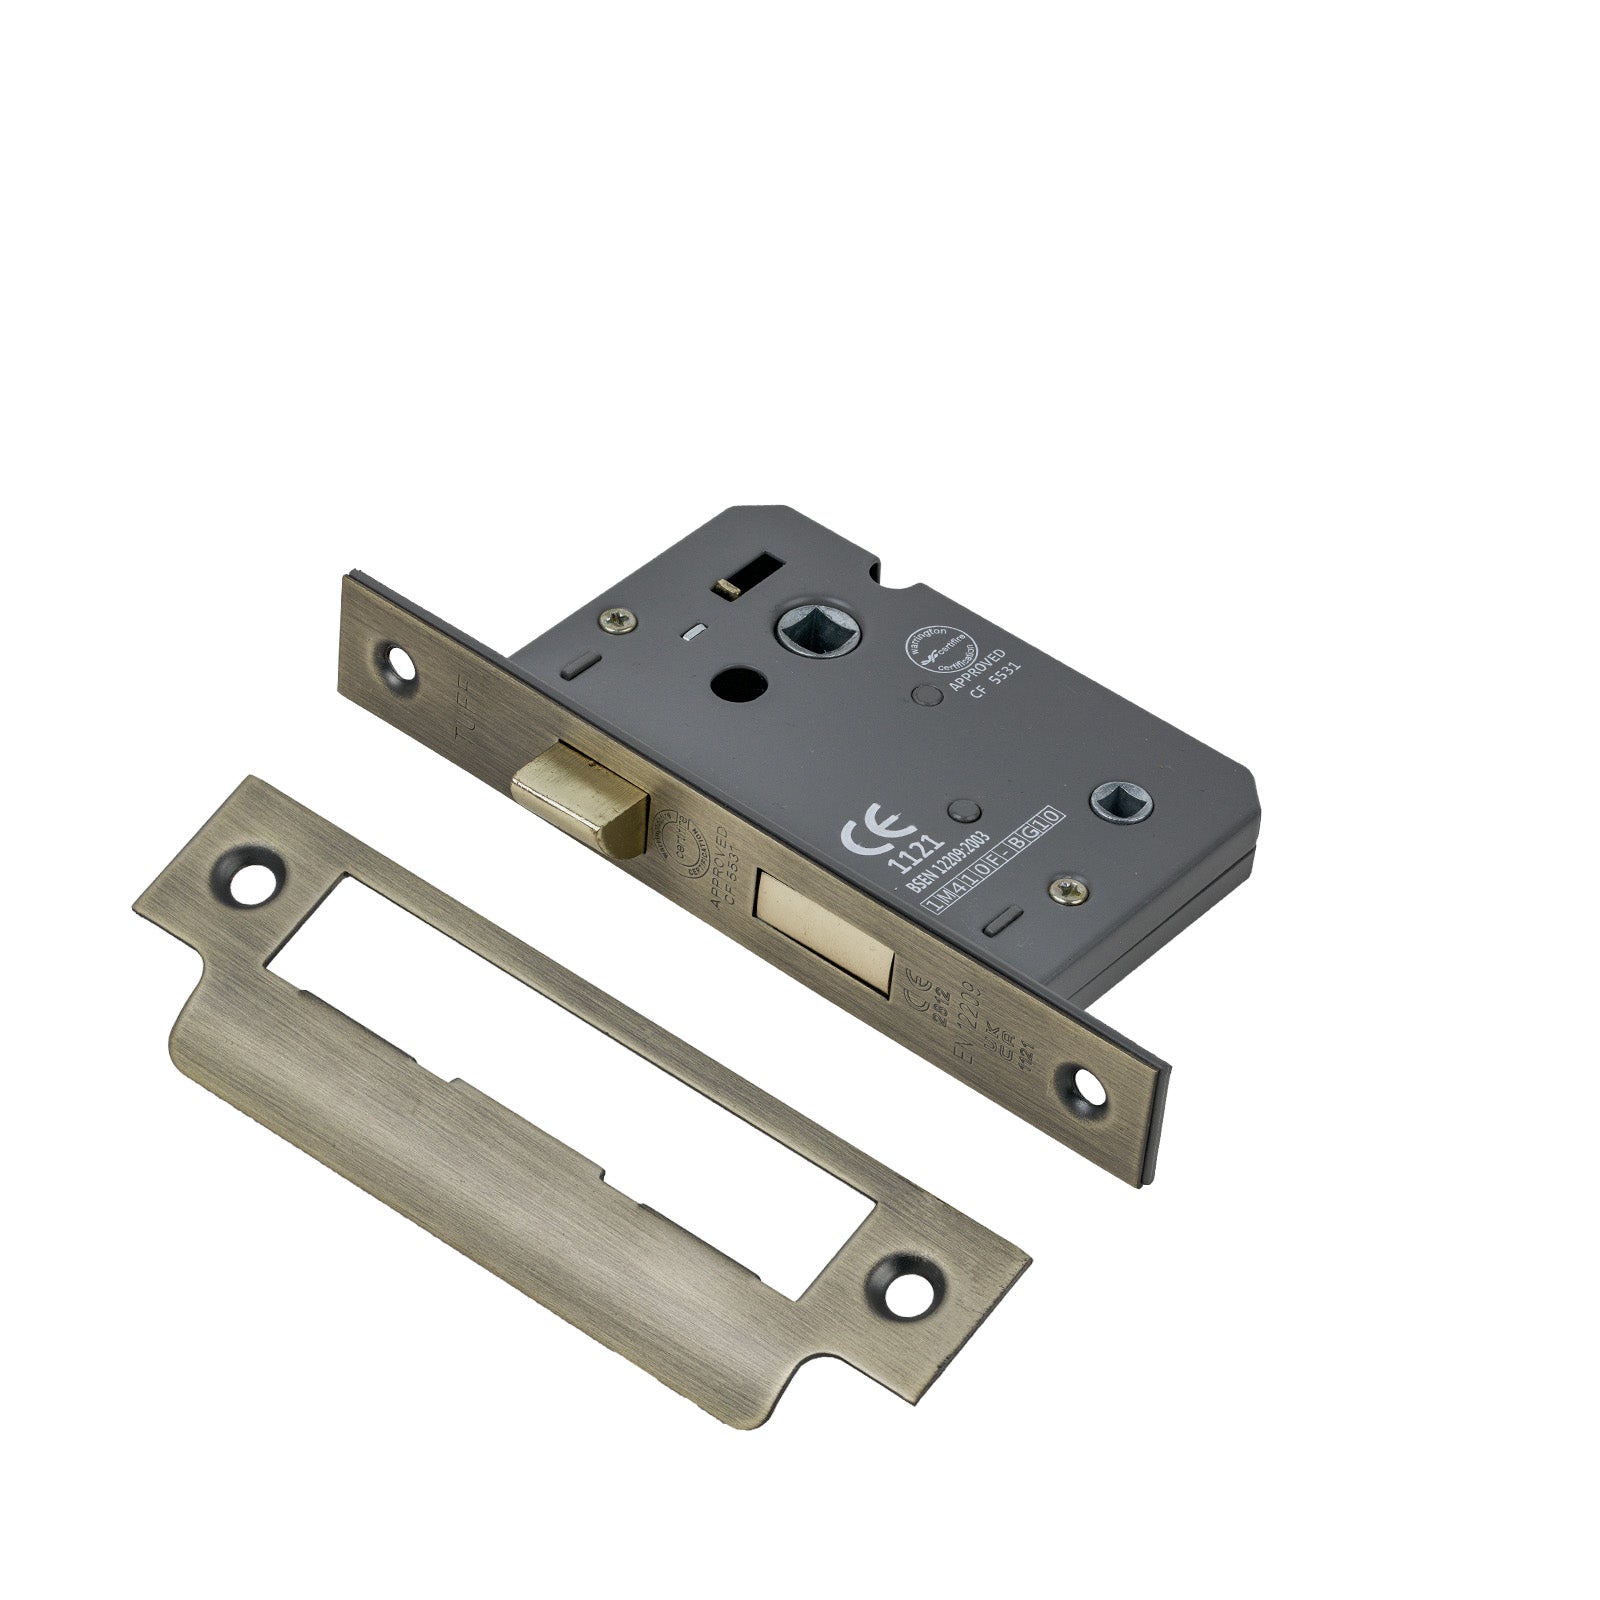 SHOW Bathroom Sash Lock - 2.5 Inch with Matt Antique Brass finished forend and striker plate